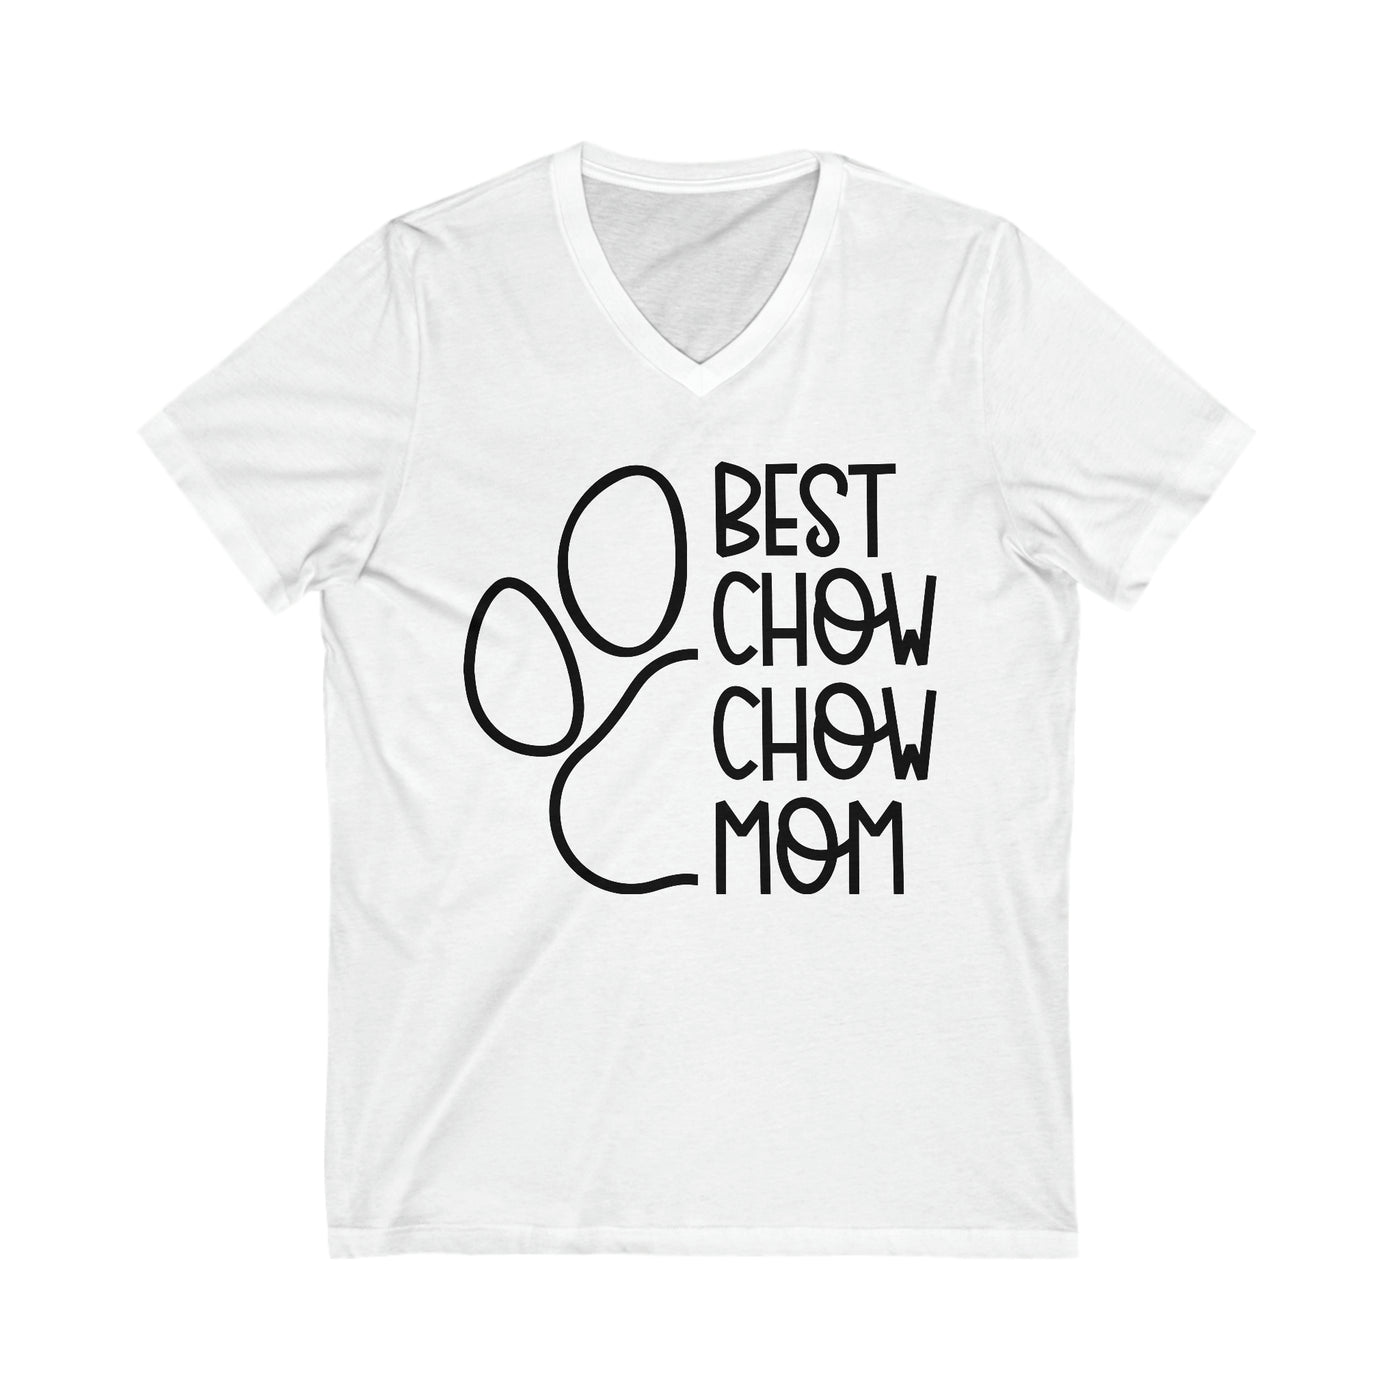 Best Chow Chow Mom V-Neck